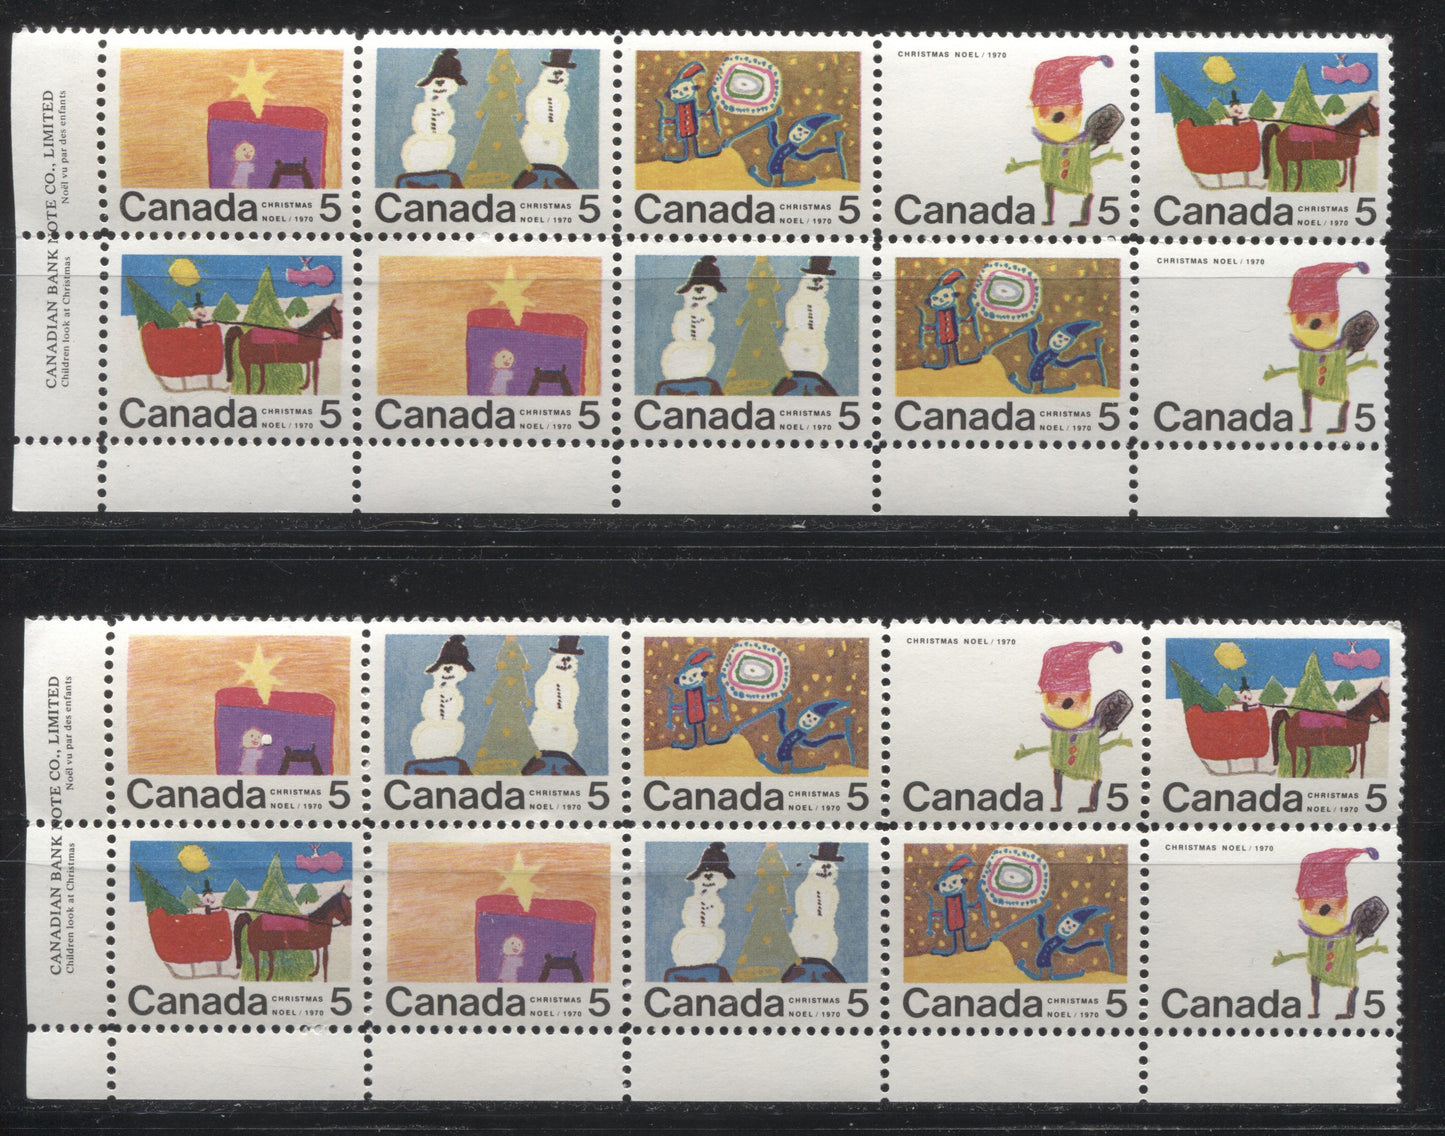 Lot 102 Canada #519-523 5c Multicoloured 1970 Christmas Issue, Two VFNH Lower Left Inscription Blocks of 10 on Smooth HB12 and HB11 Papers, Perfs 11.9 x 11.85 and 11.9 and One With Blue Arc Between "AD" of "Canada"